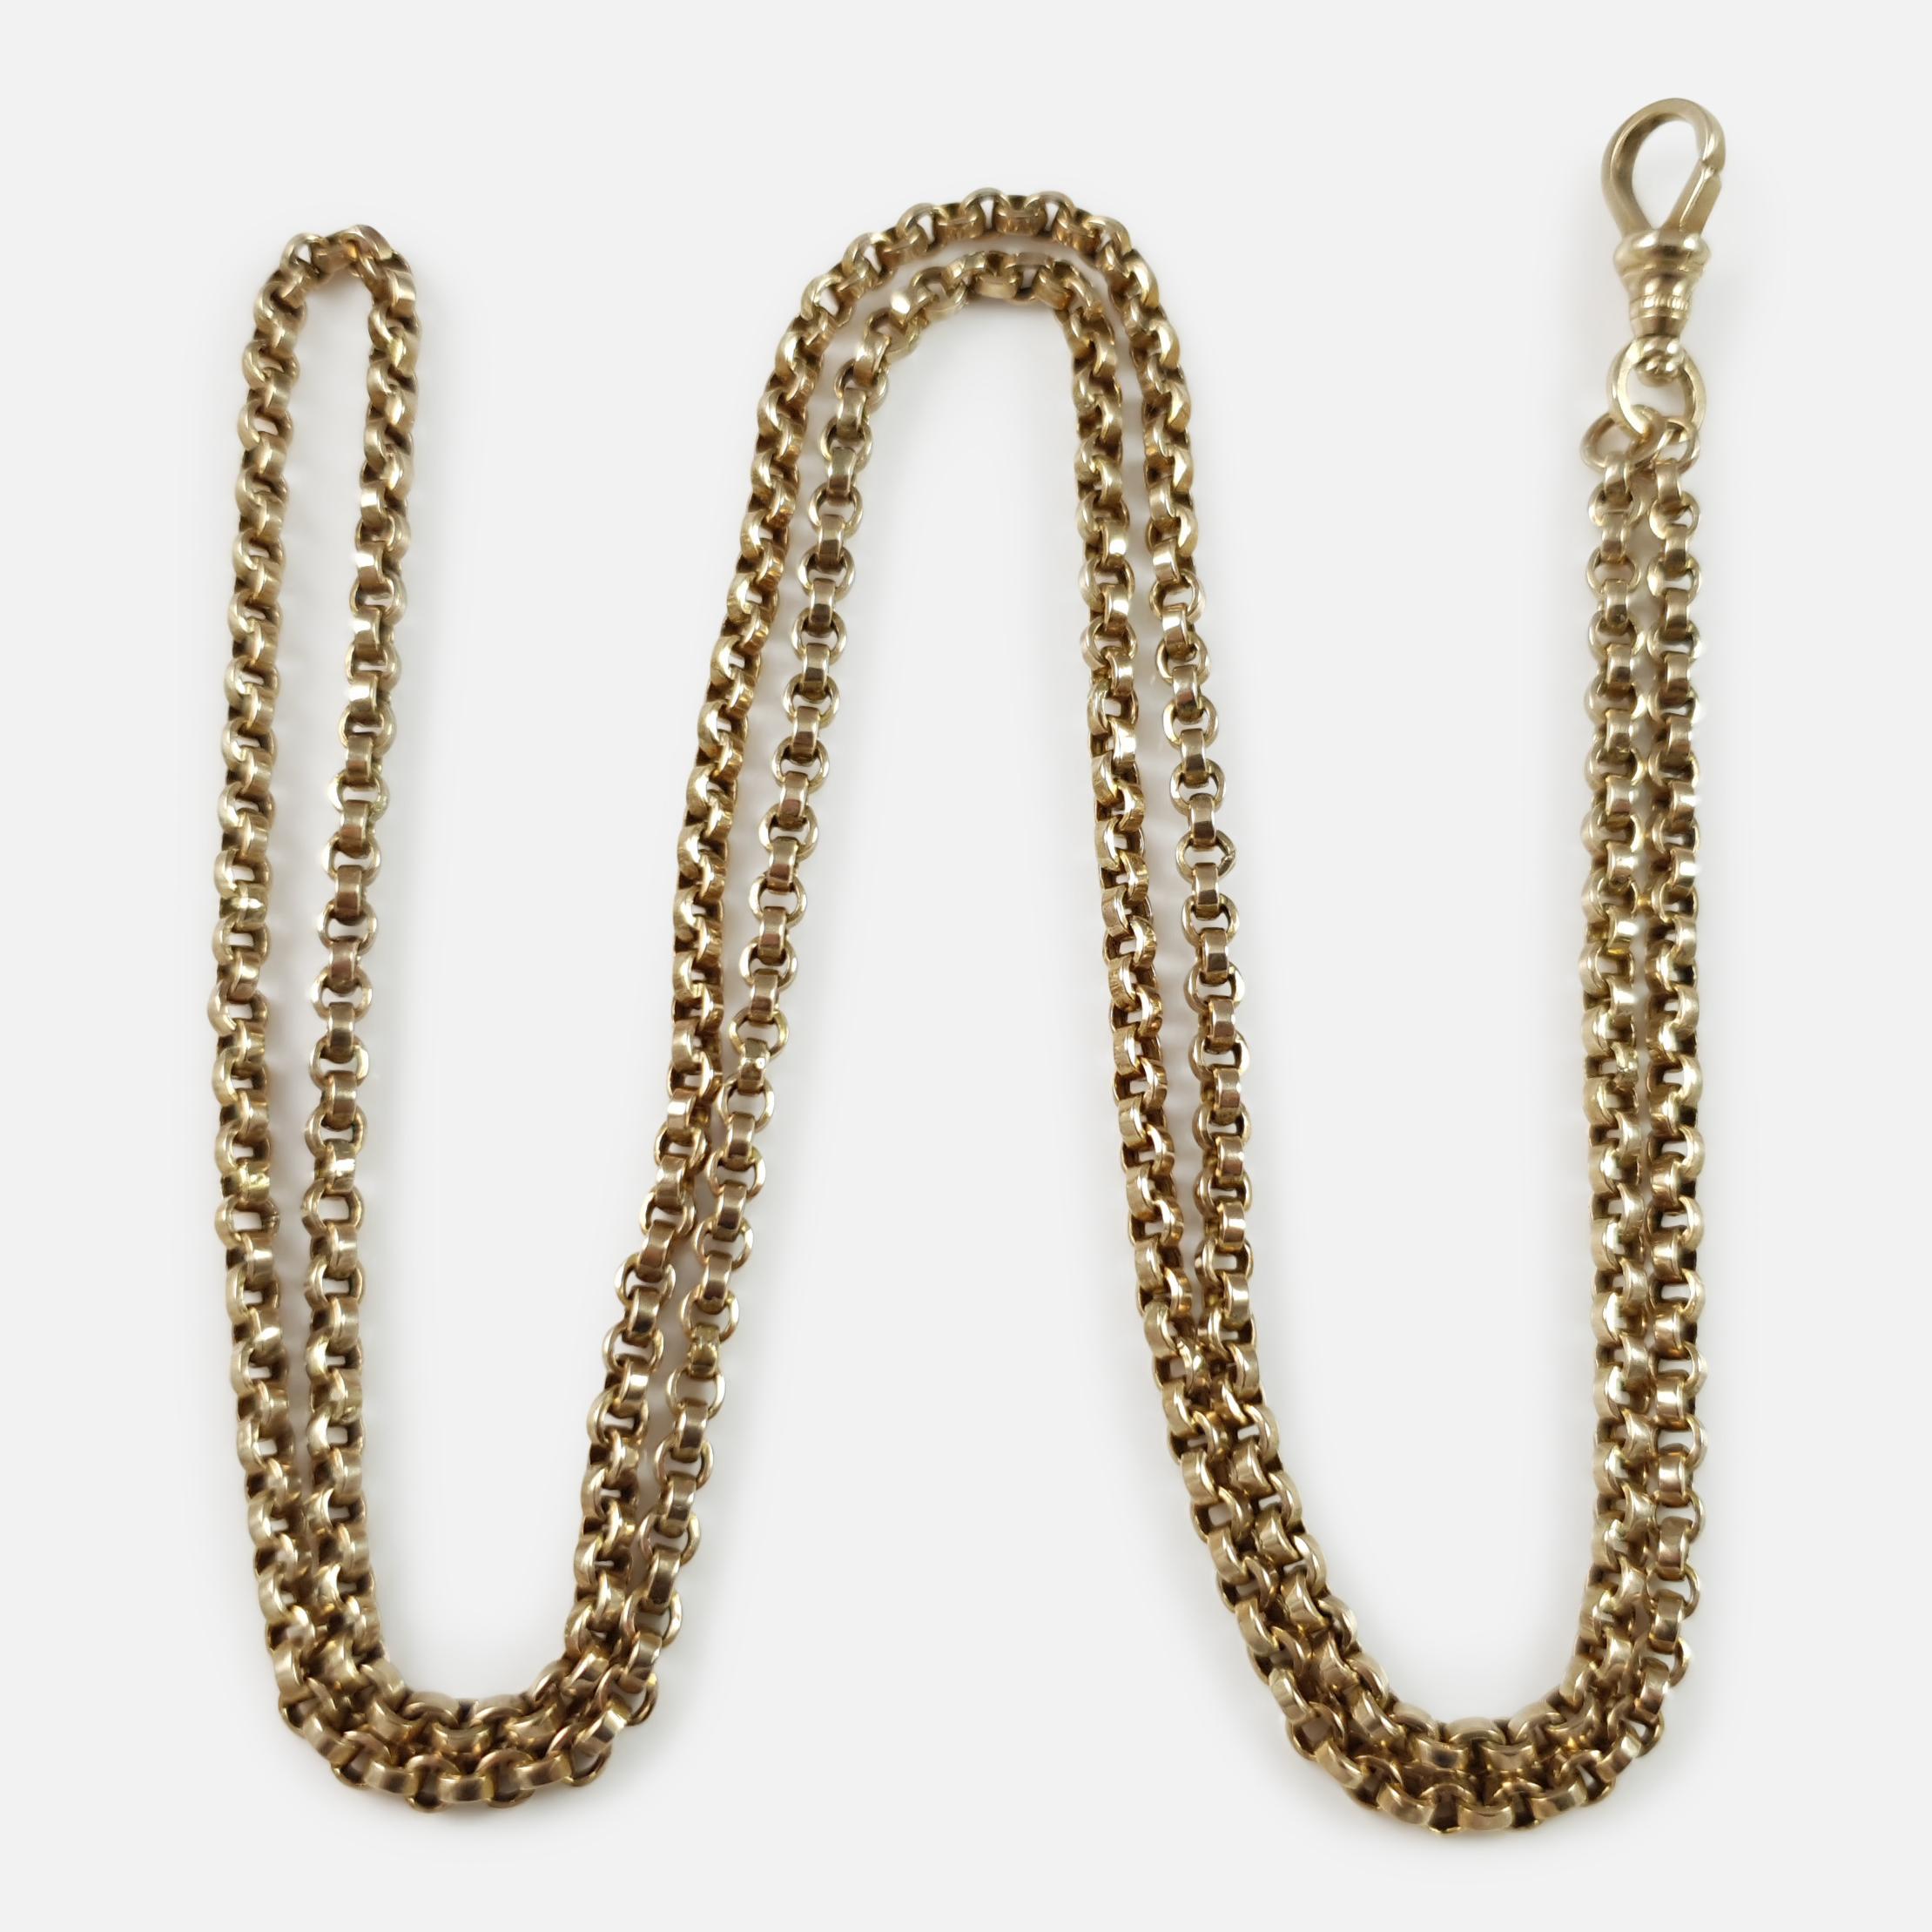 Description: - This is a superb antique Victorian 9 karat yellow gold hollow link long guard muff chain with associated dog clip.

Date: - Circa 1890.

Measurement: - The chain measures approximately 30 1/2 inches (77.5cm) in length.

Complimentary